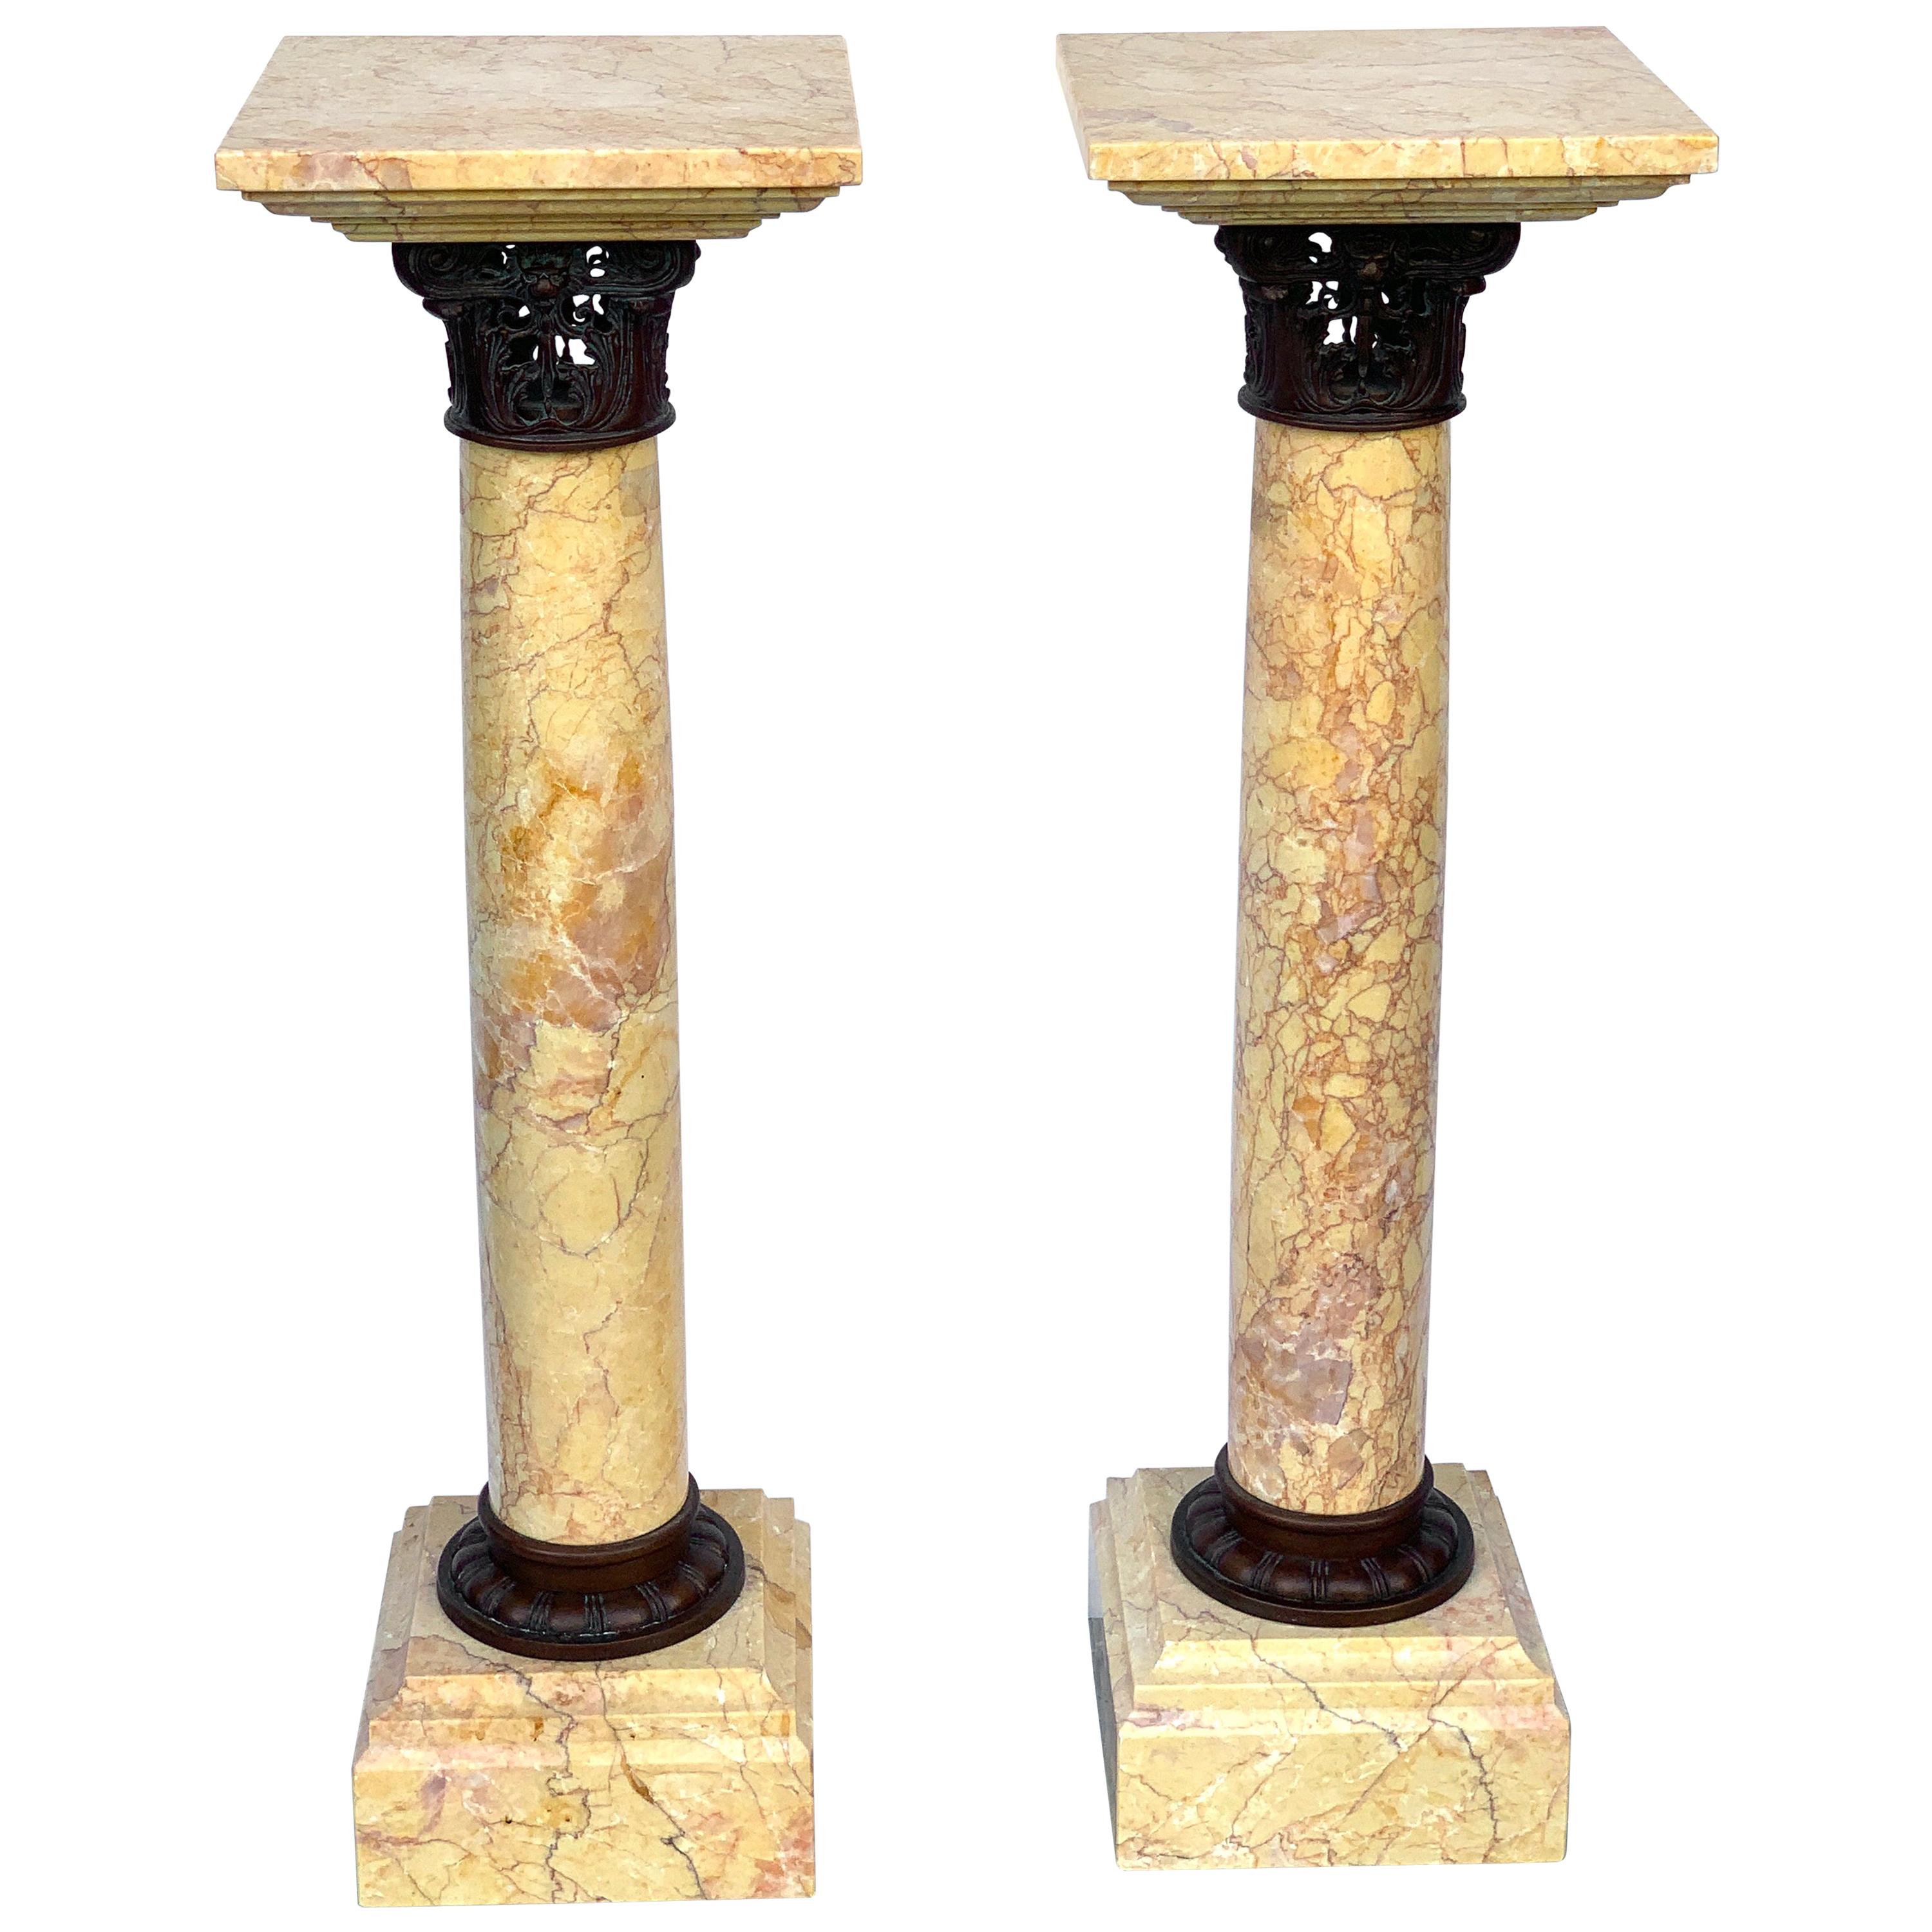 Pair of Neoclassical Siena Marble and Bronze Pedestals